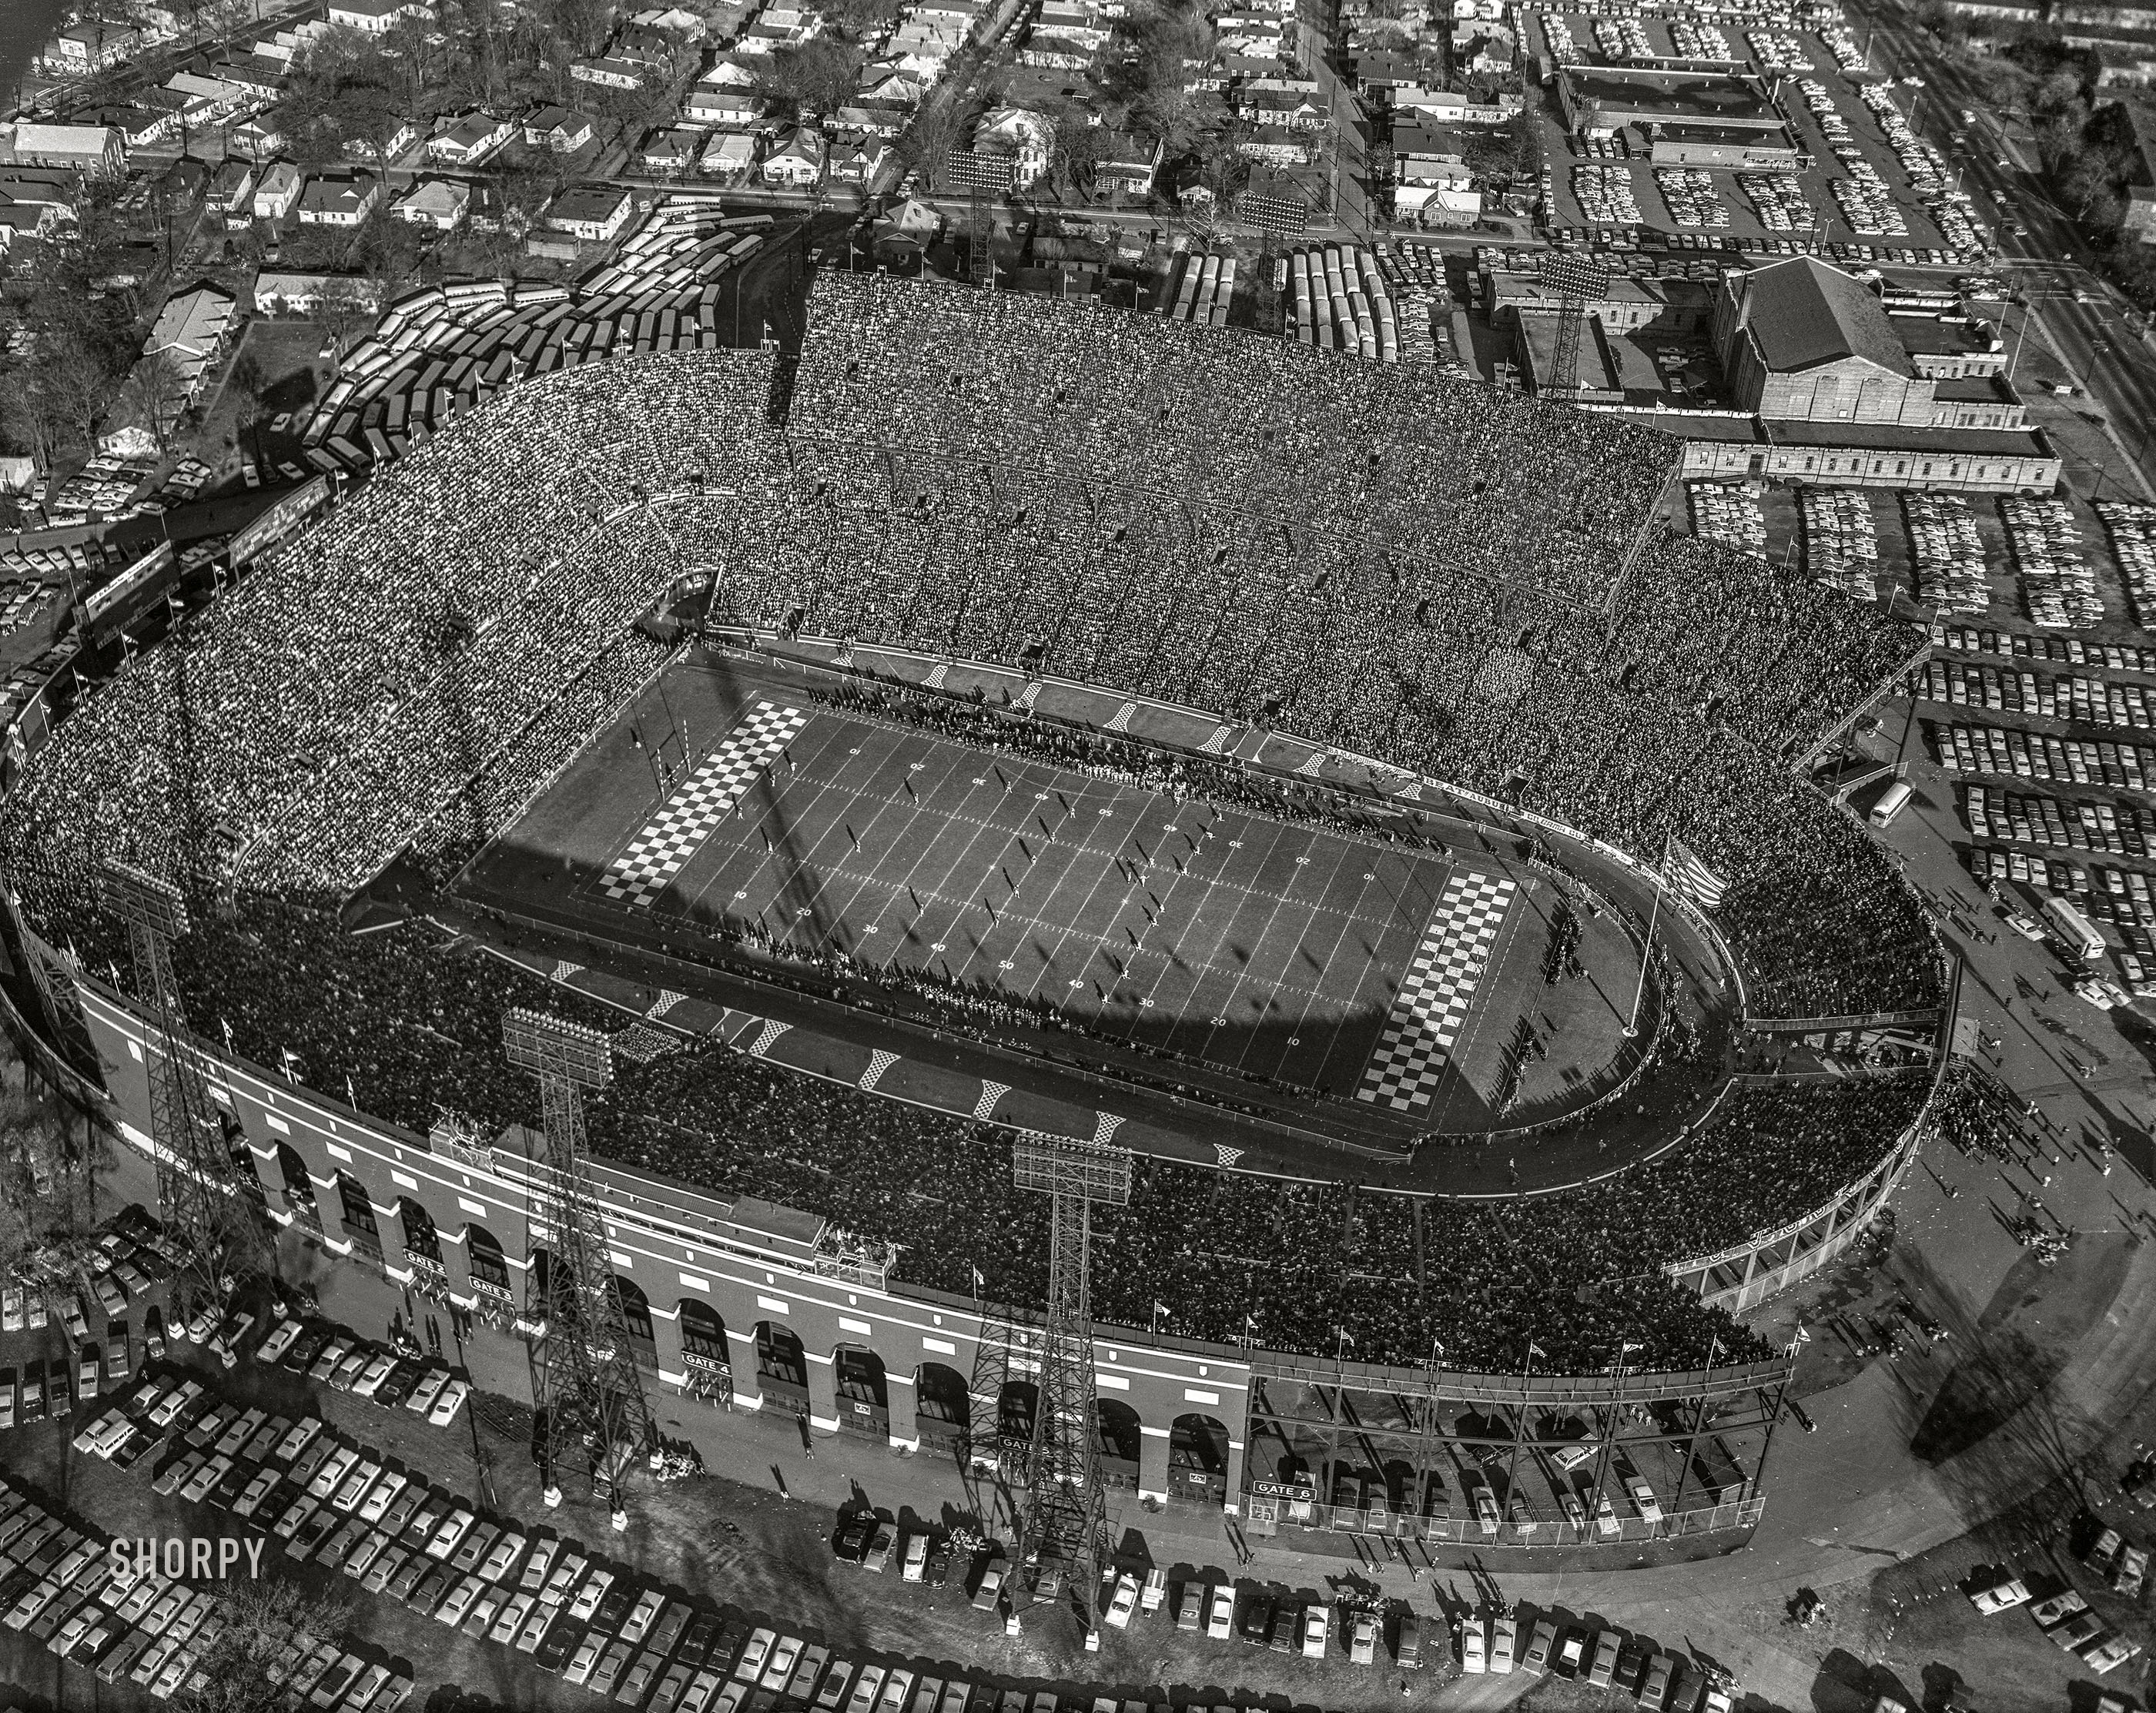 November 27, 1965. "Iron Bowl -- Alabama vs. Auburn." The Tide swamped the Tigers 30-3 at Legion Field in Birmingham. 4x5 acetate negative from the News Photo Archive. View full size.